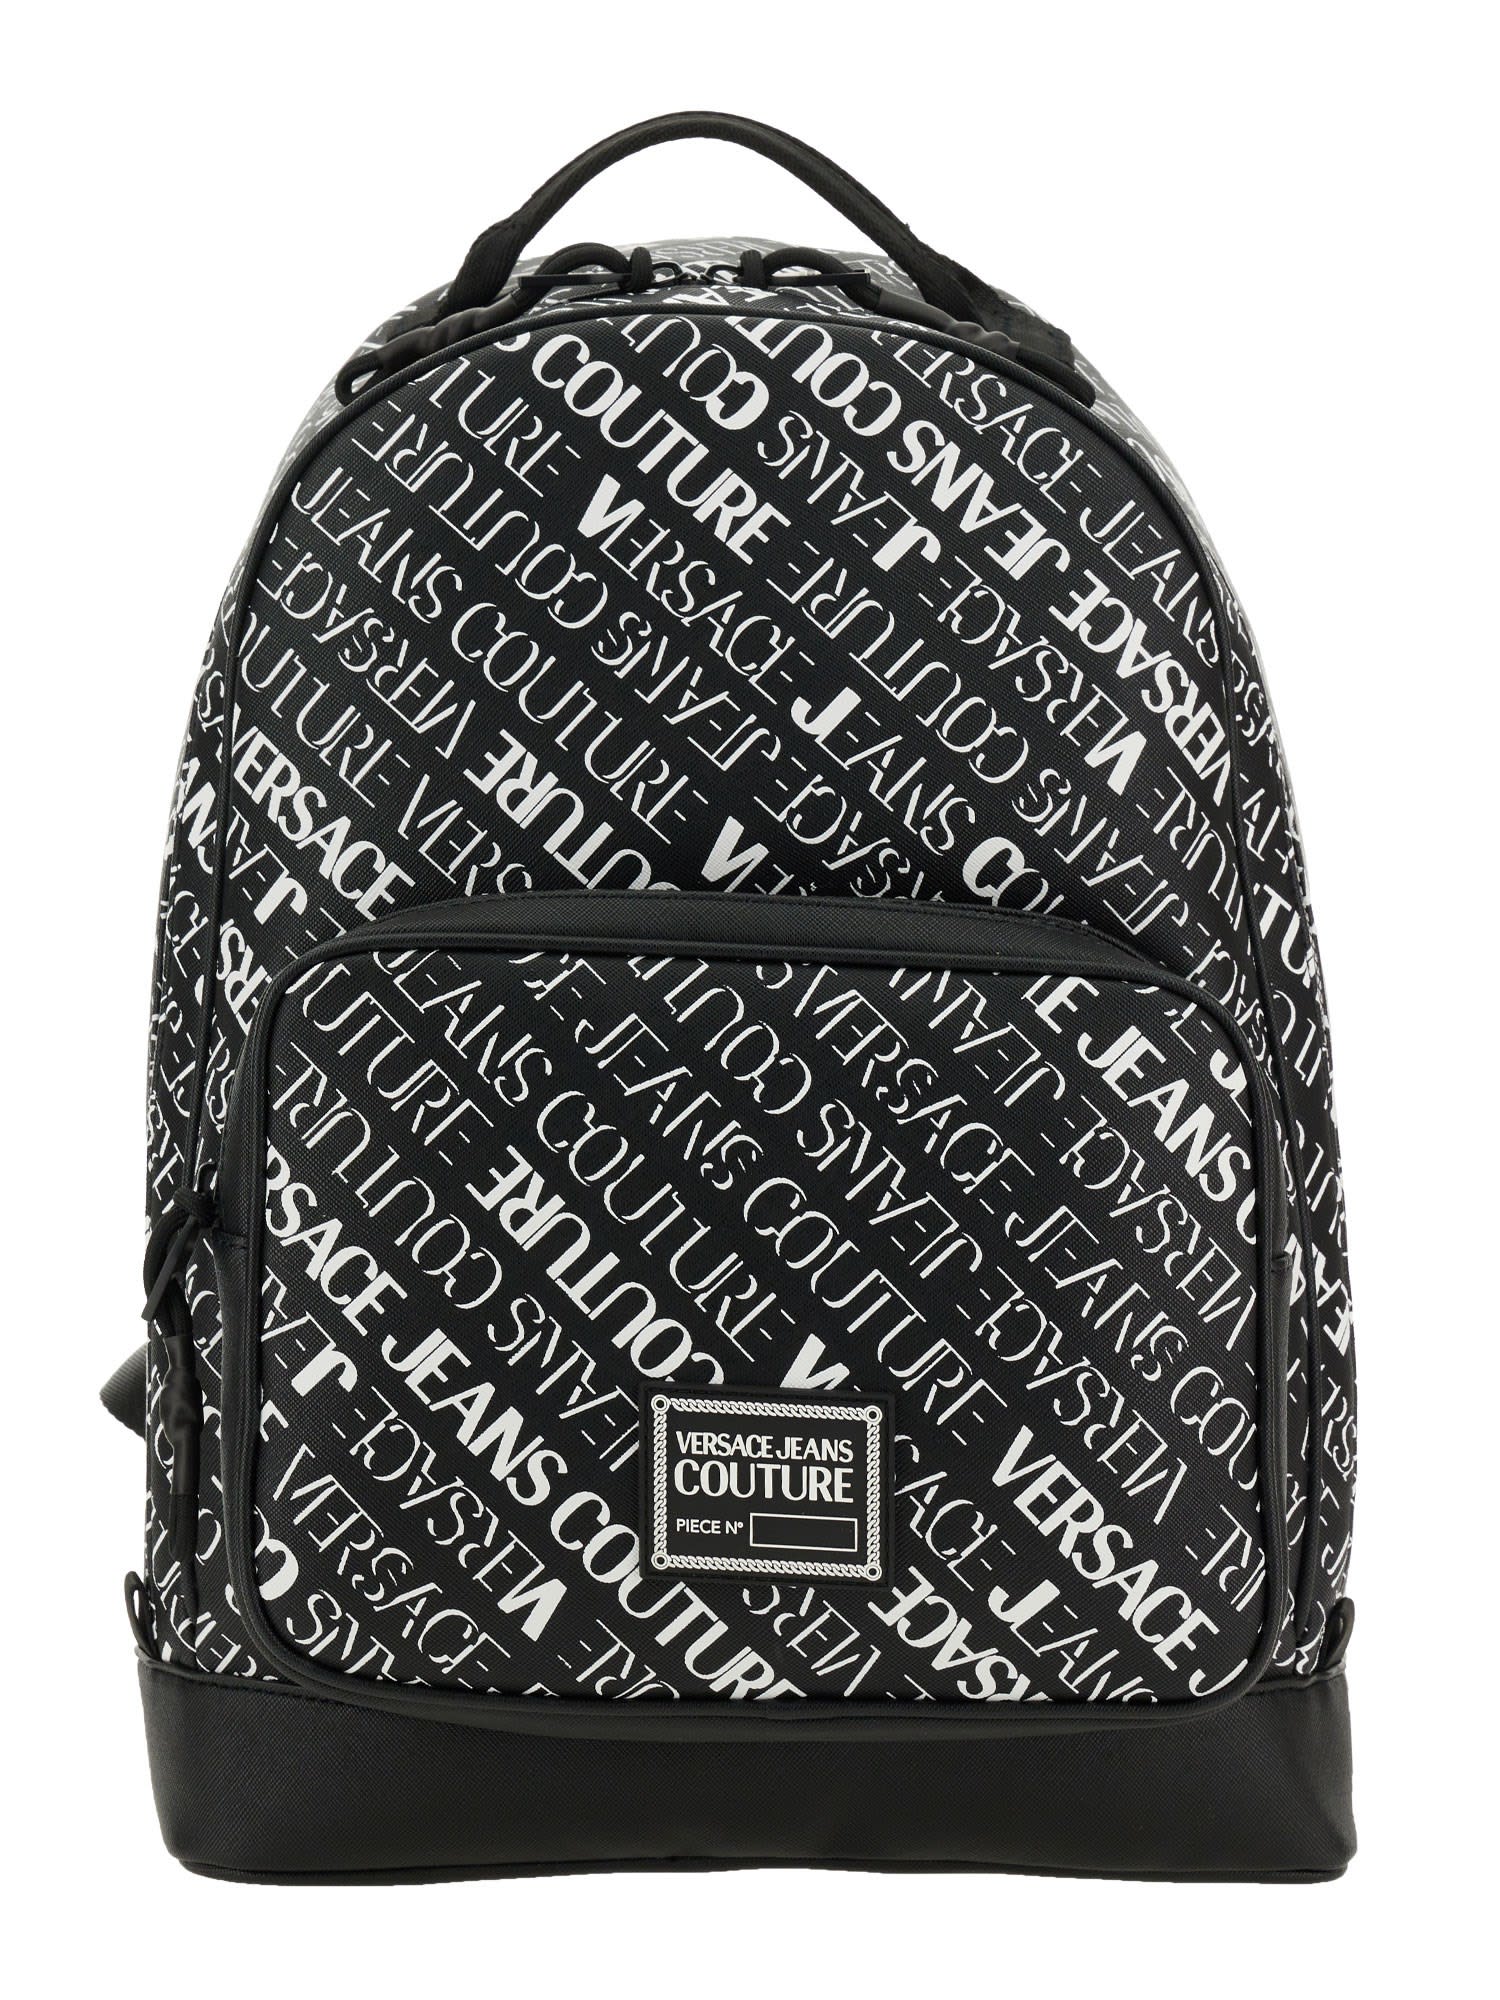 VERSACE JEANS COUTURE BACKPACK WITH ALL-OVER LOGO